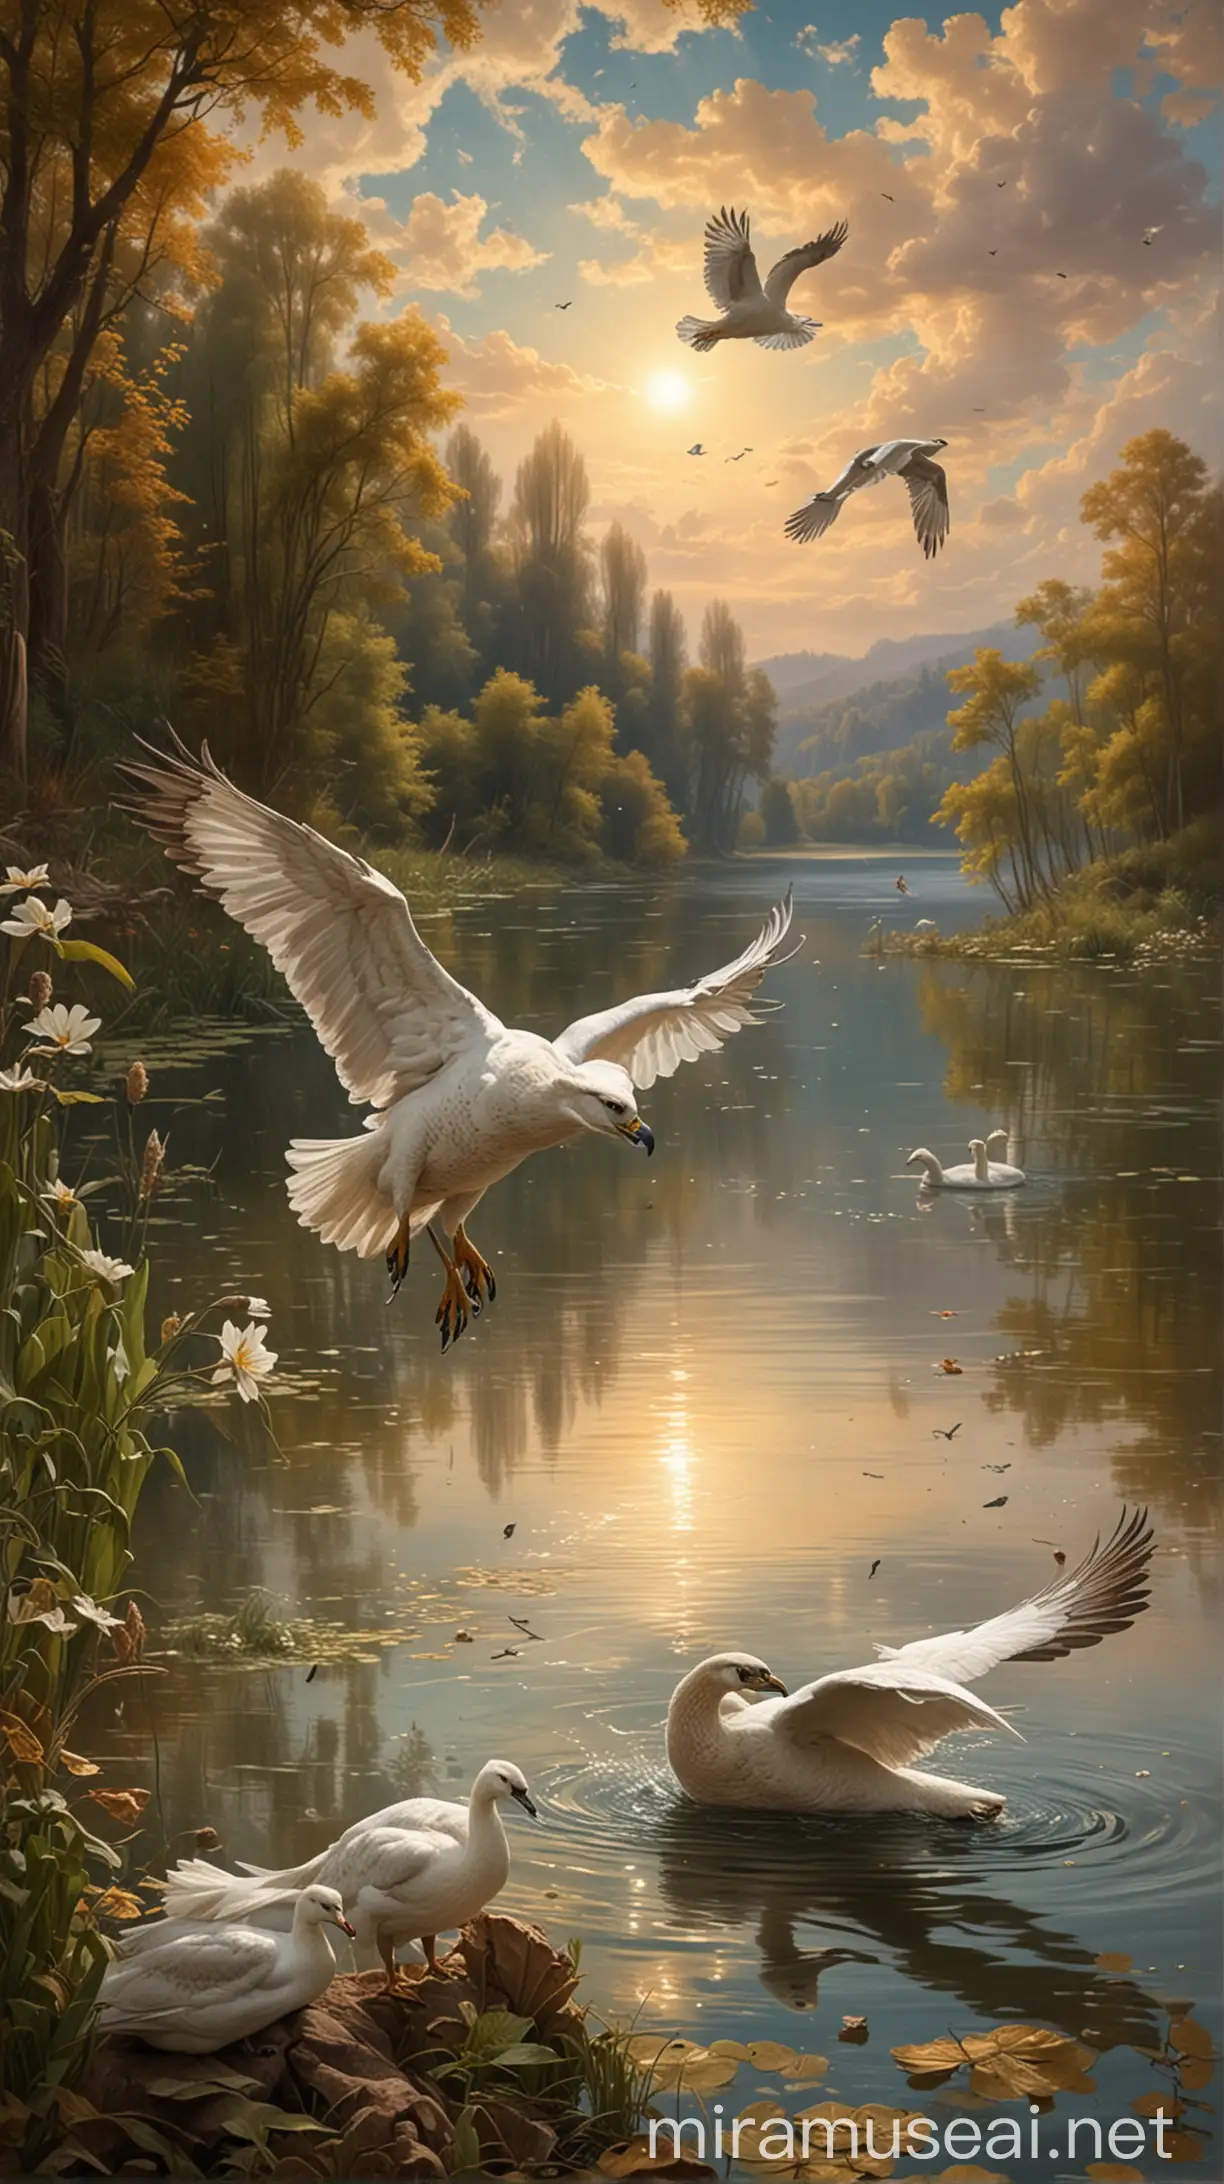 The falcon and the swan The falcon soared high in the skies and looked down disdainfully at the swan, swimming in the lake